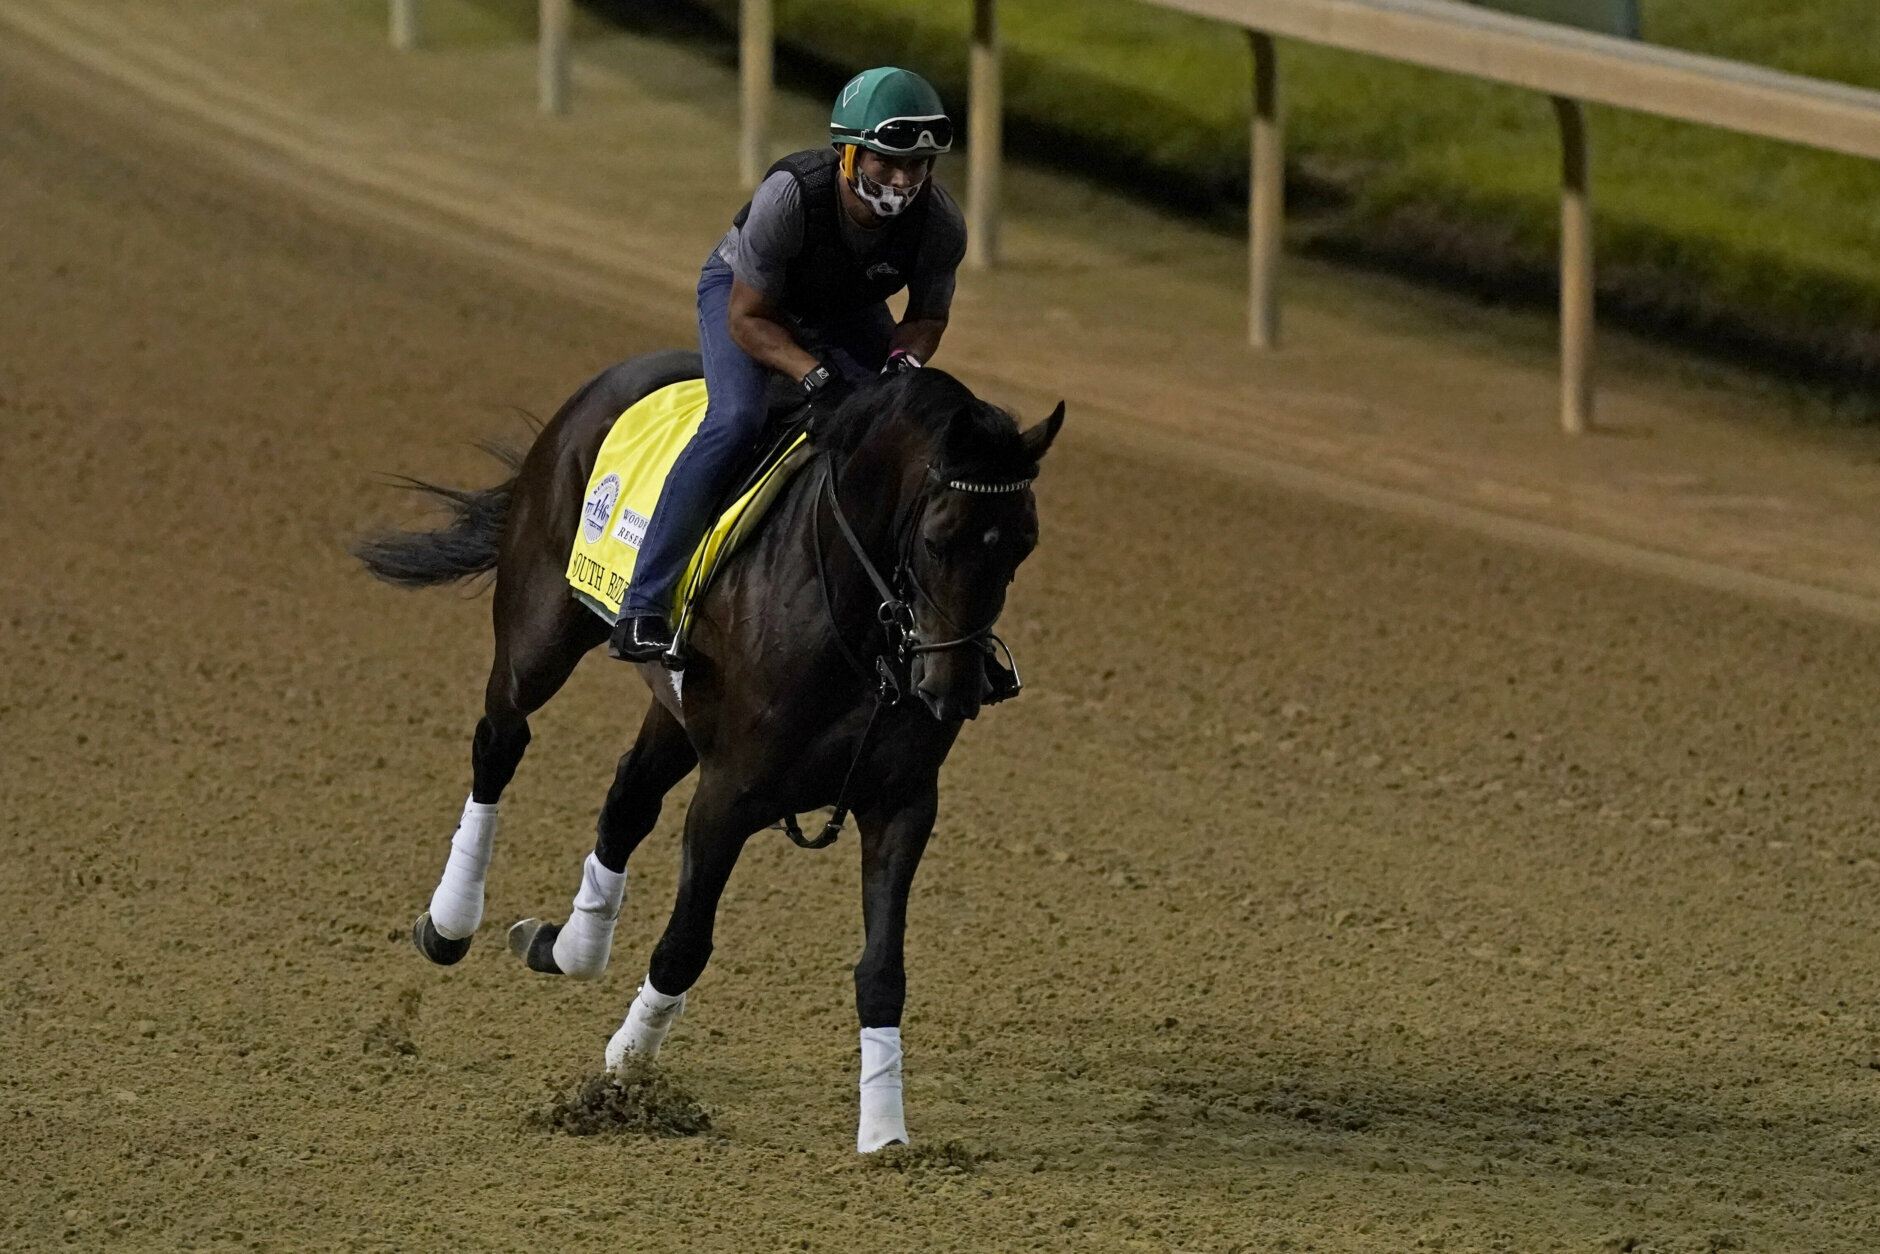 Kentucky Derby entry South Bend runs during an early-morning workout at Churchill Downs, Friday, Sept. 4, 2020, in Louisville, Ky. The Kentucky Derby is scheduled for Saturday, Sept. 5th. (AP Photo/Charlie Riedel)